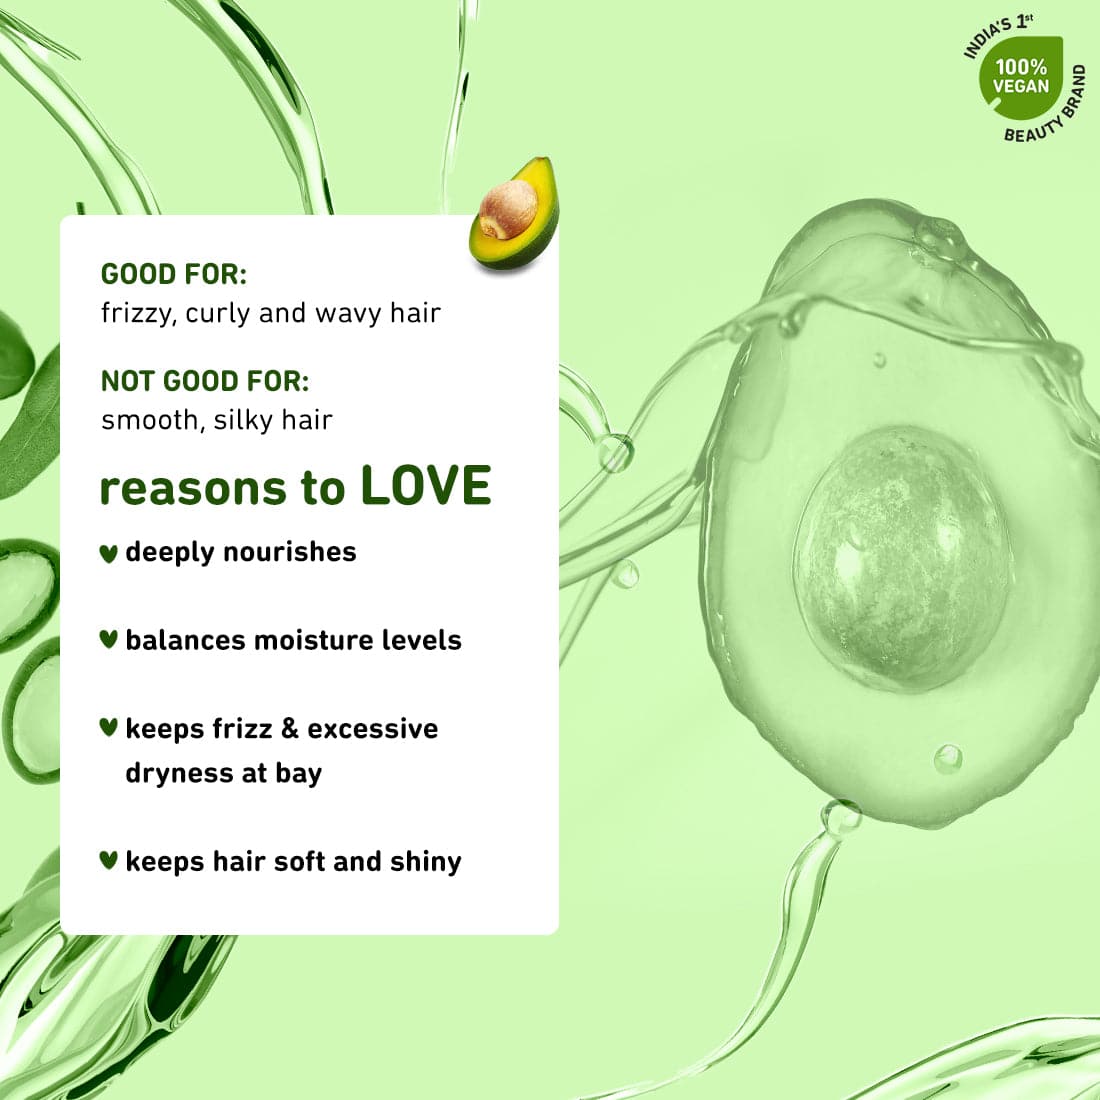 Avocado & Argan Smoothing & Curl Defining Combo| Shampoo, Conditioner, Curl Gel | For curly, wavy, frizzy hair| 100% vegan | Sulphate-Free and Paraben-Free